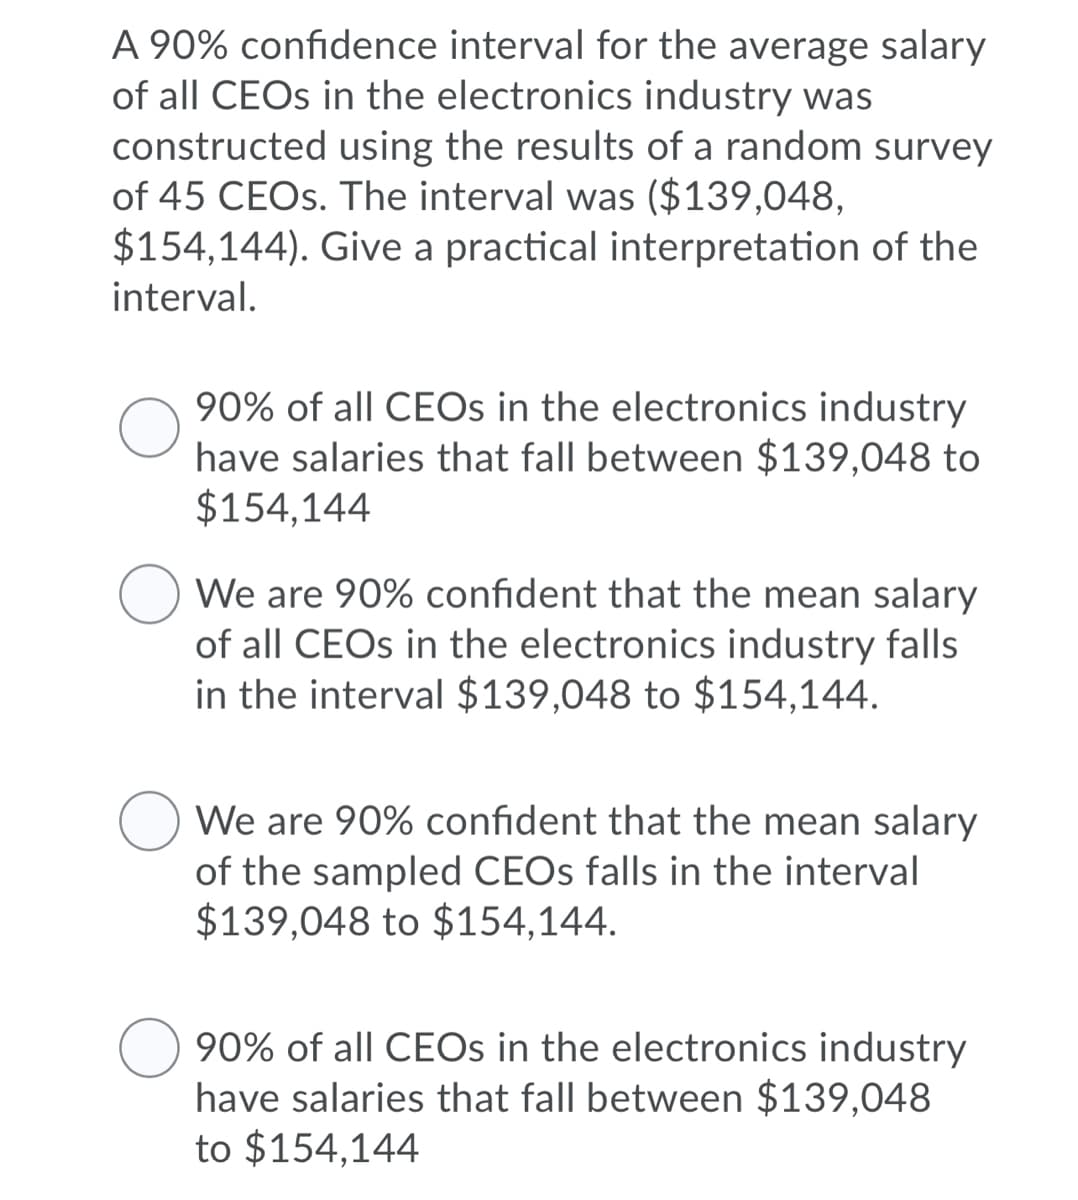 A 90% confidence interval for the average salary
of all CEOS in the electronics industry was
constructed using the results of a random survey
of 45 CEOS. The interval was ($139,048,
$154,144). Give a practical interpretation of the
interval.
90% of all CEOS in the electronics industry
have salaries that fall between $139,048 to
$154,144
We are 90% confident that the mean salary
of all CEOS in the electronics industry falls
in the interval $139,048 to $154,144.
We are 90% confident that the mean salary
of the sampled CEOS falls in the interval
$139,048 to $154,144.
90% of all CEOS in the electronics industry
have salaries that fall between $139,048
to $154,144
